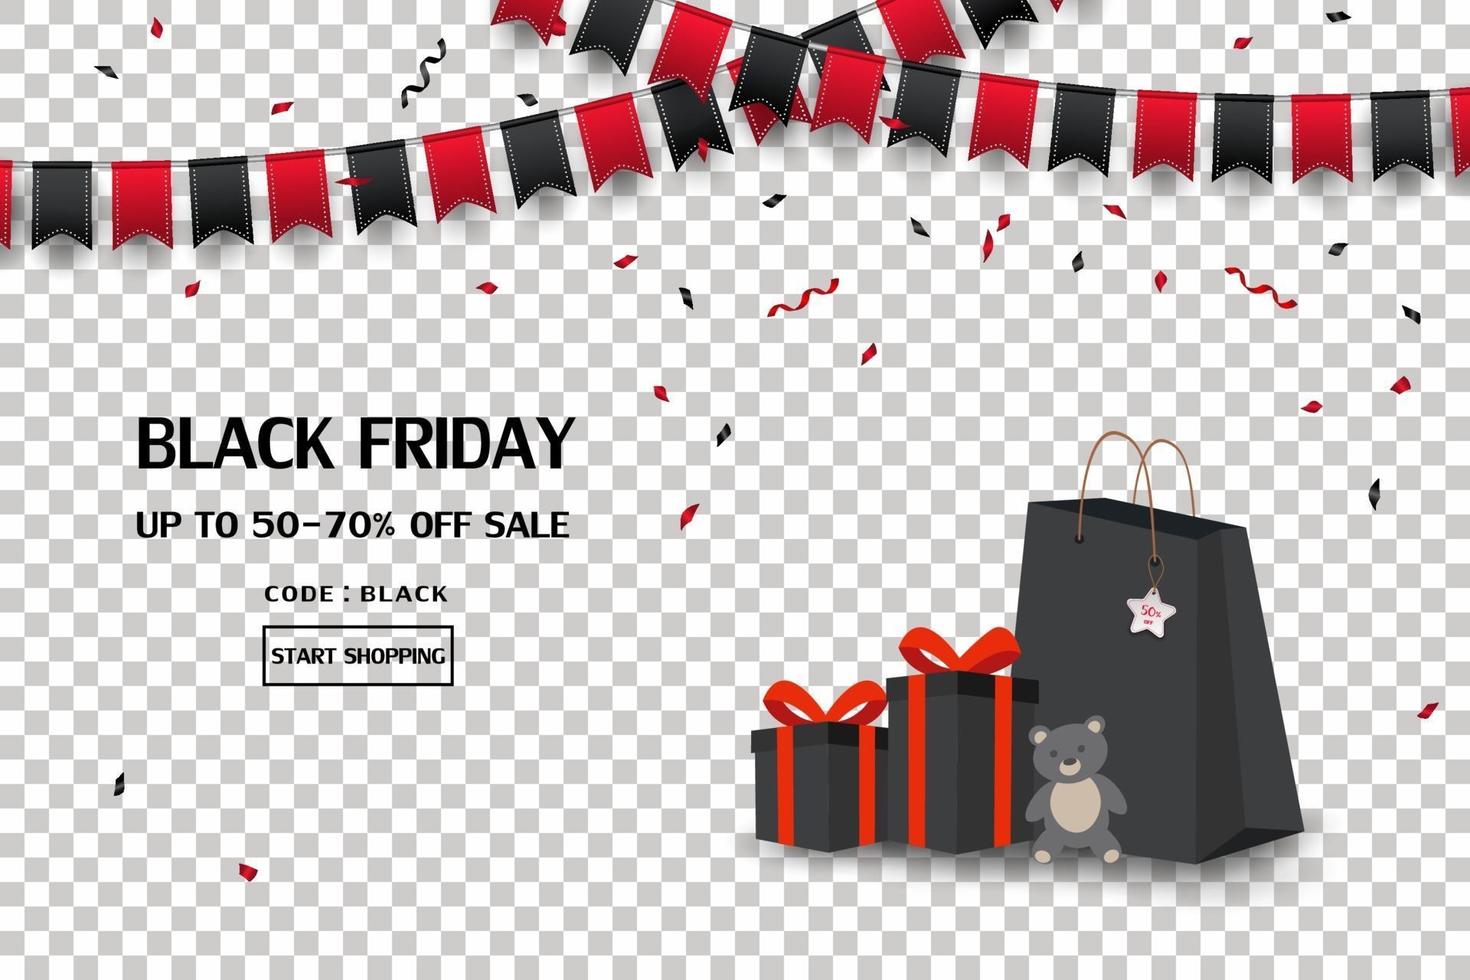 Black friday sale banner with gift boxes, shopping bags, flag and confetti vector